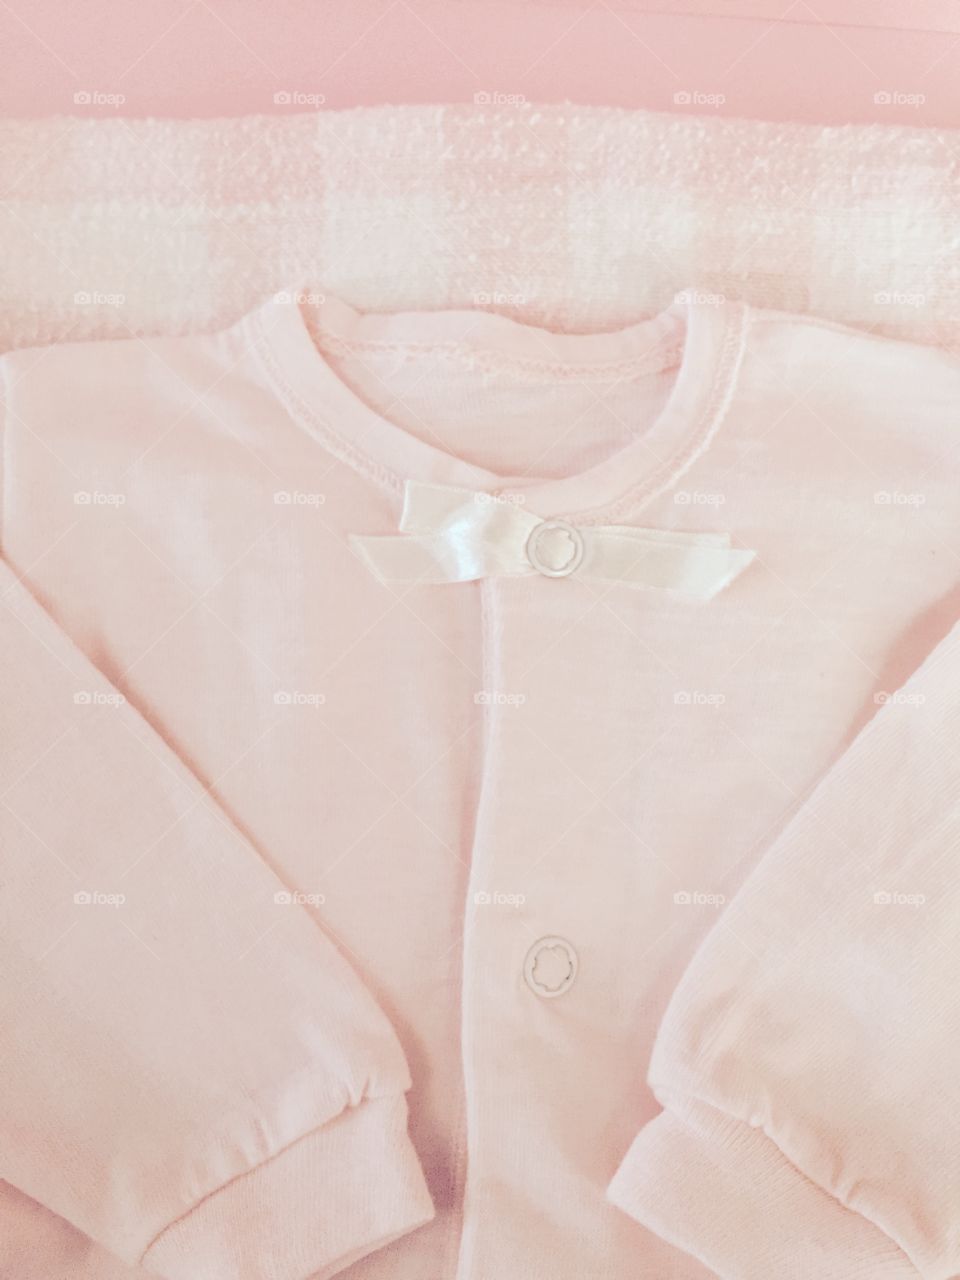 Overhead view of pink fashionable top textile